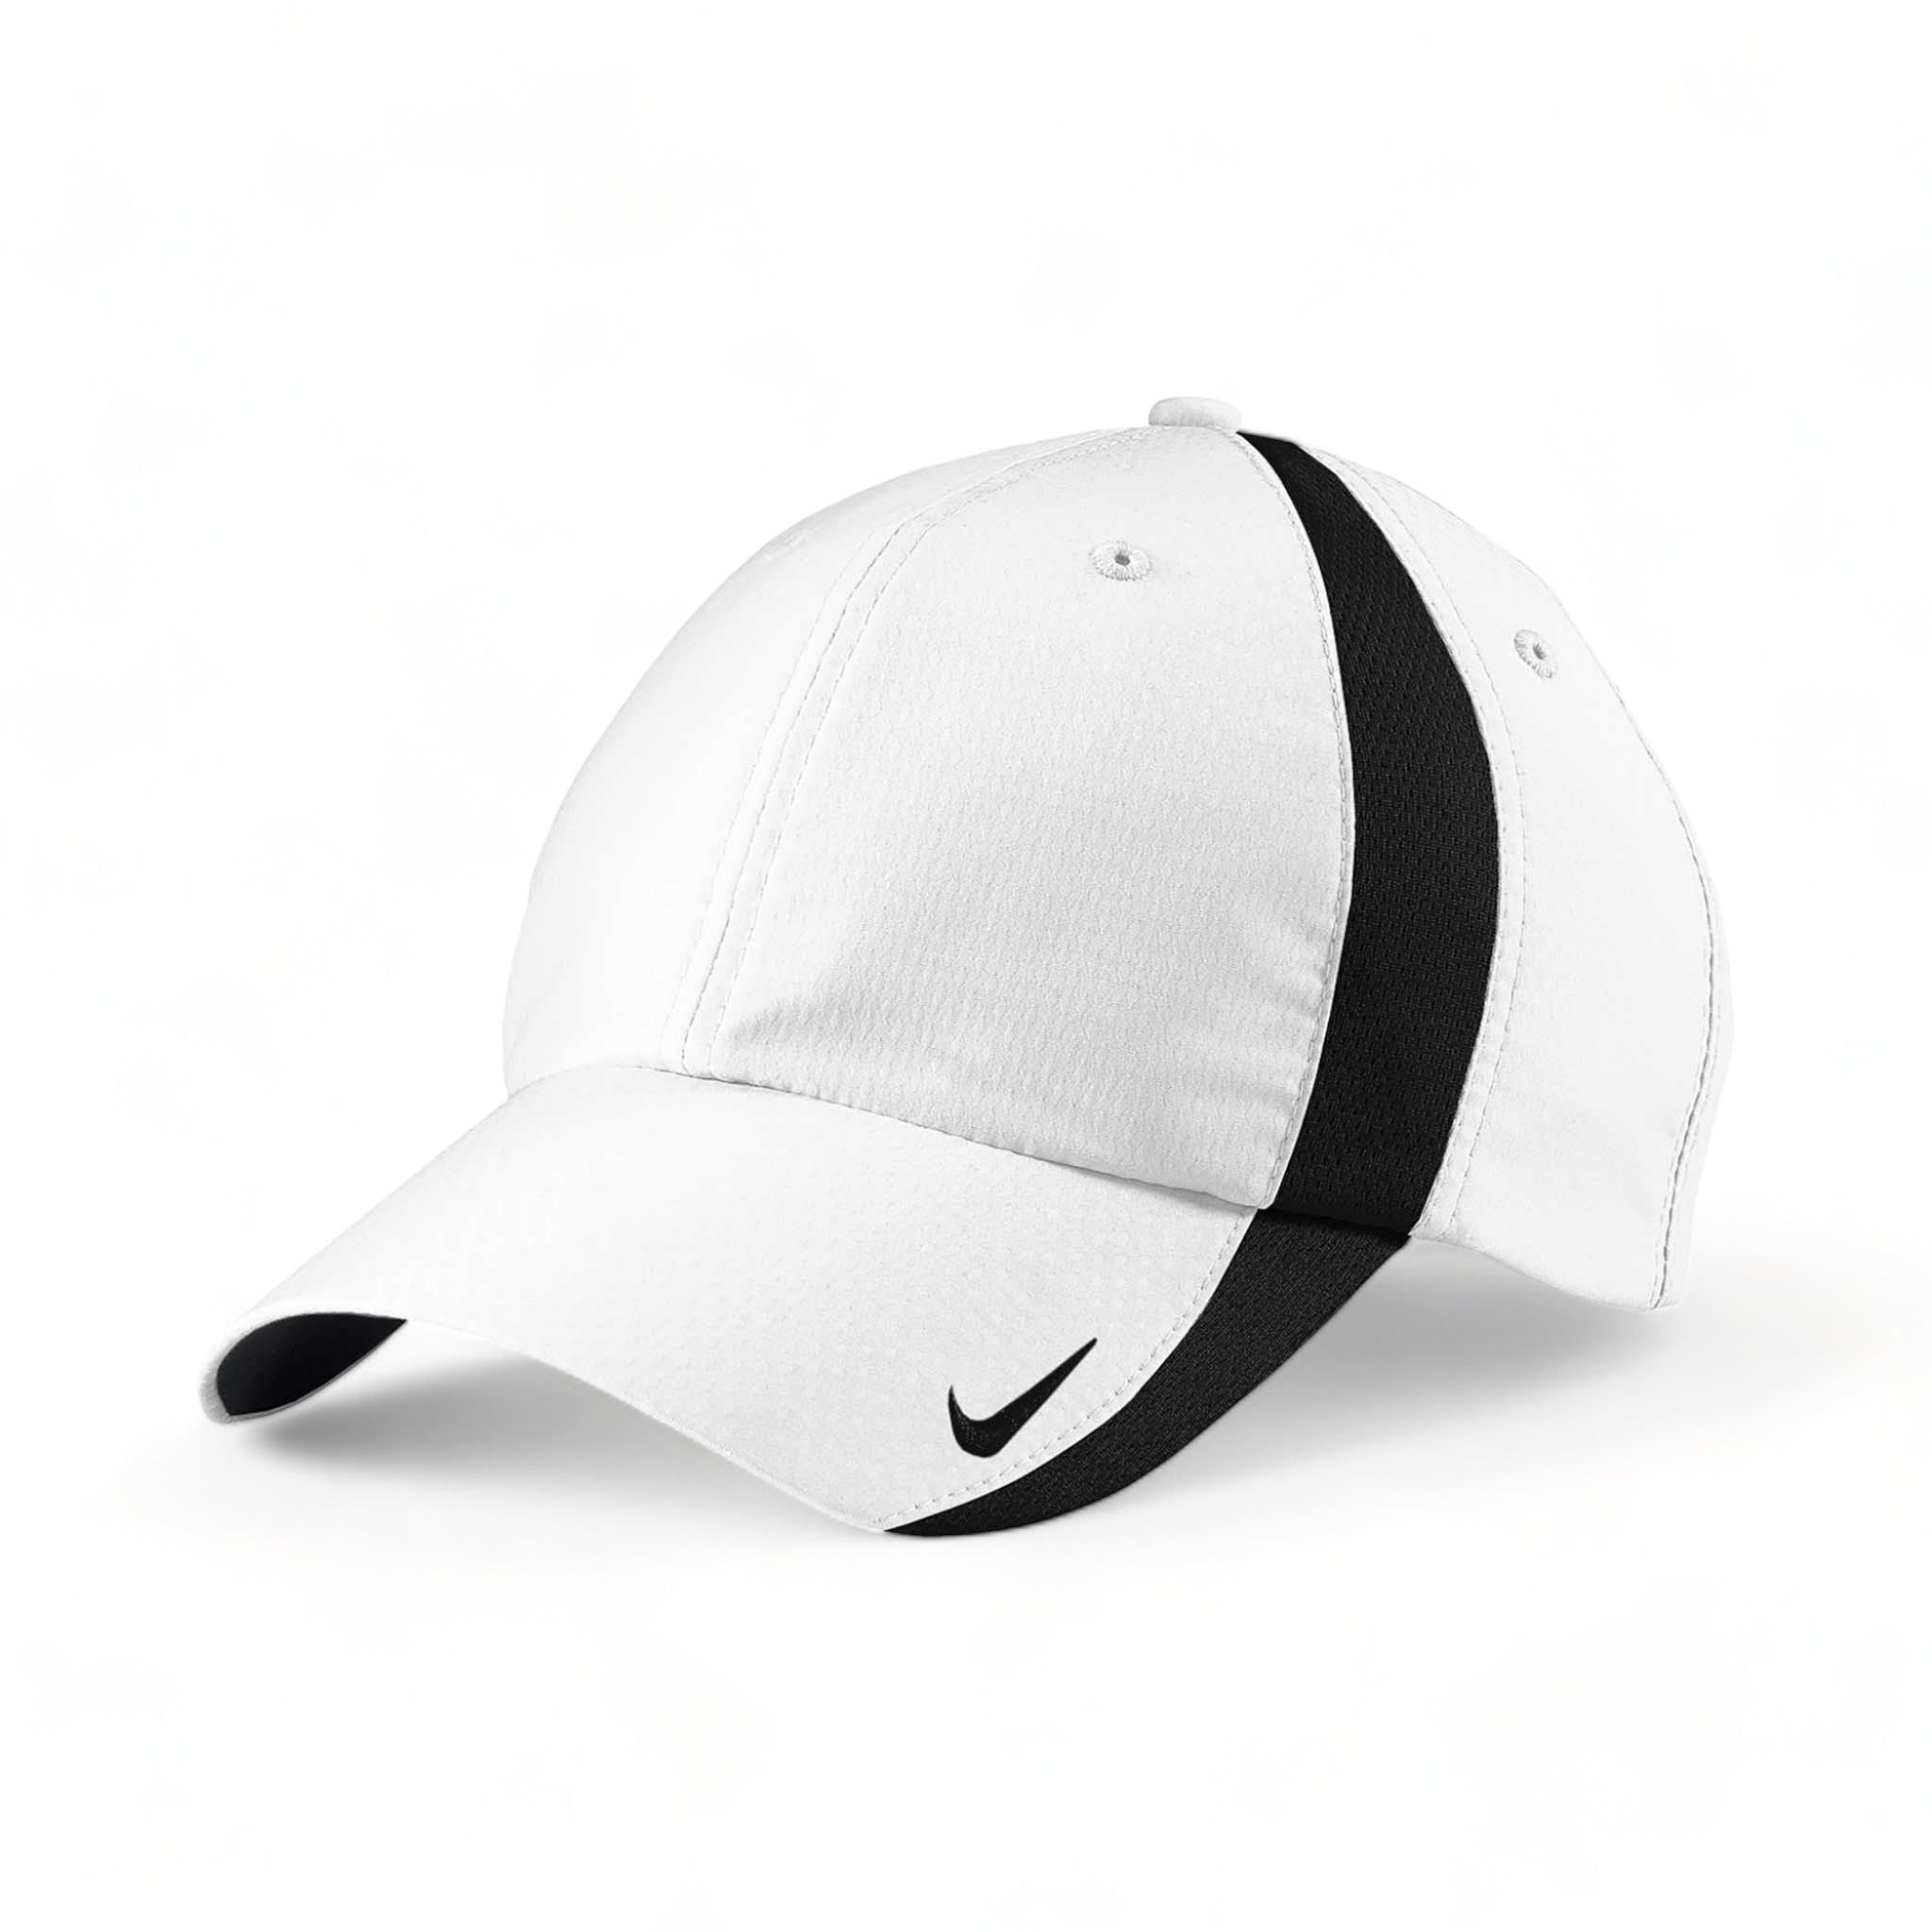 Side view of Nike NKFD9709 custom hat in white and black